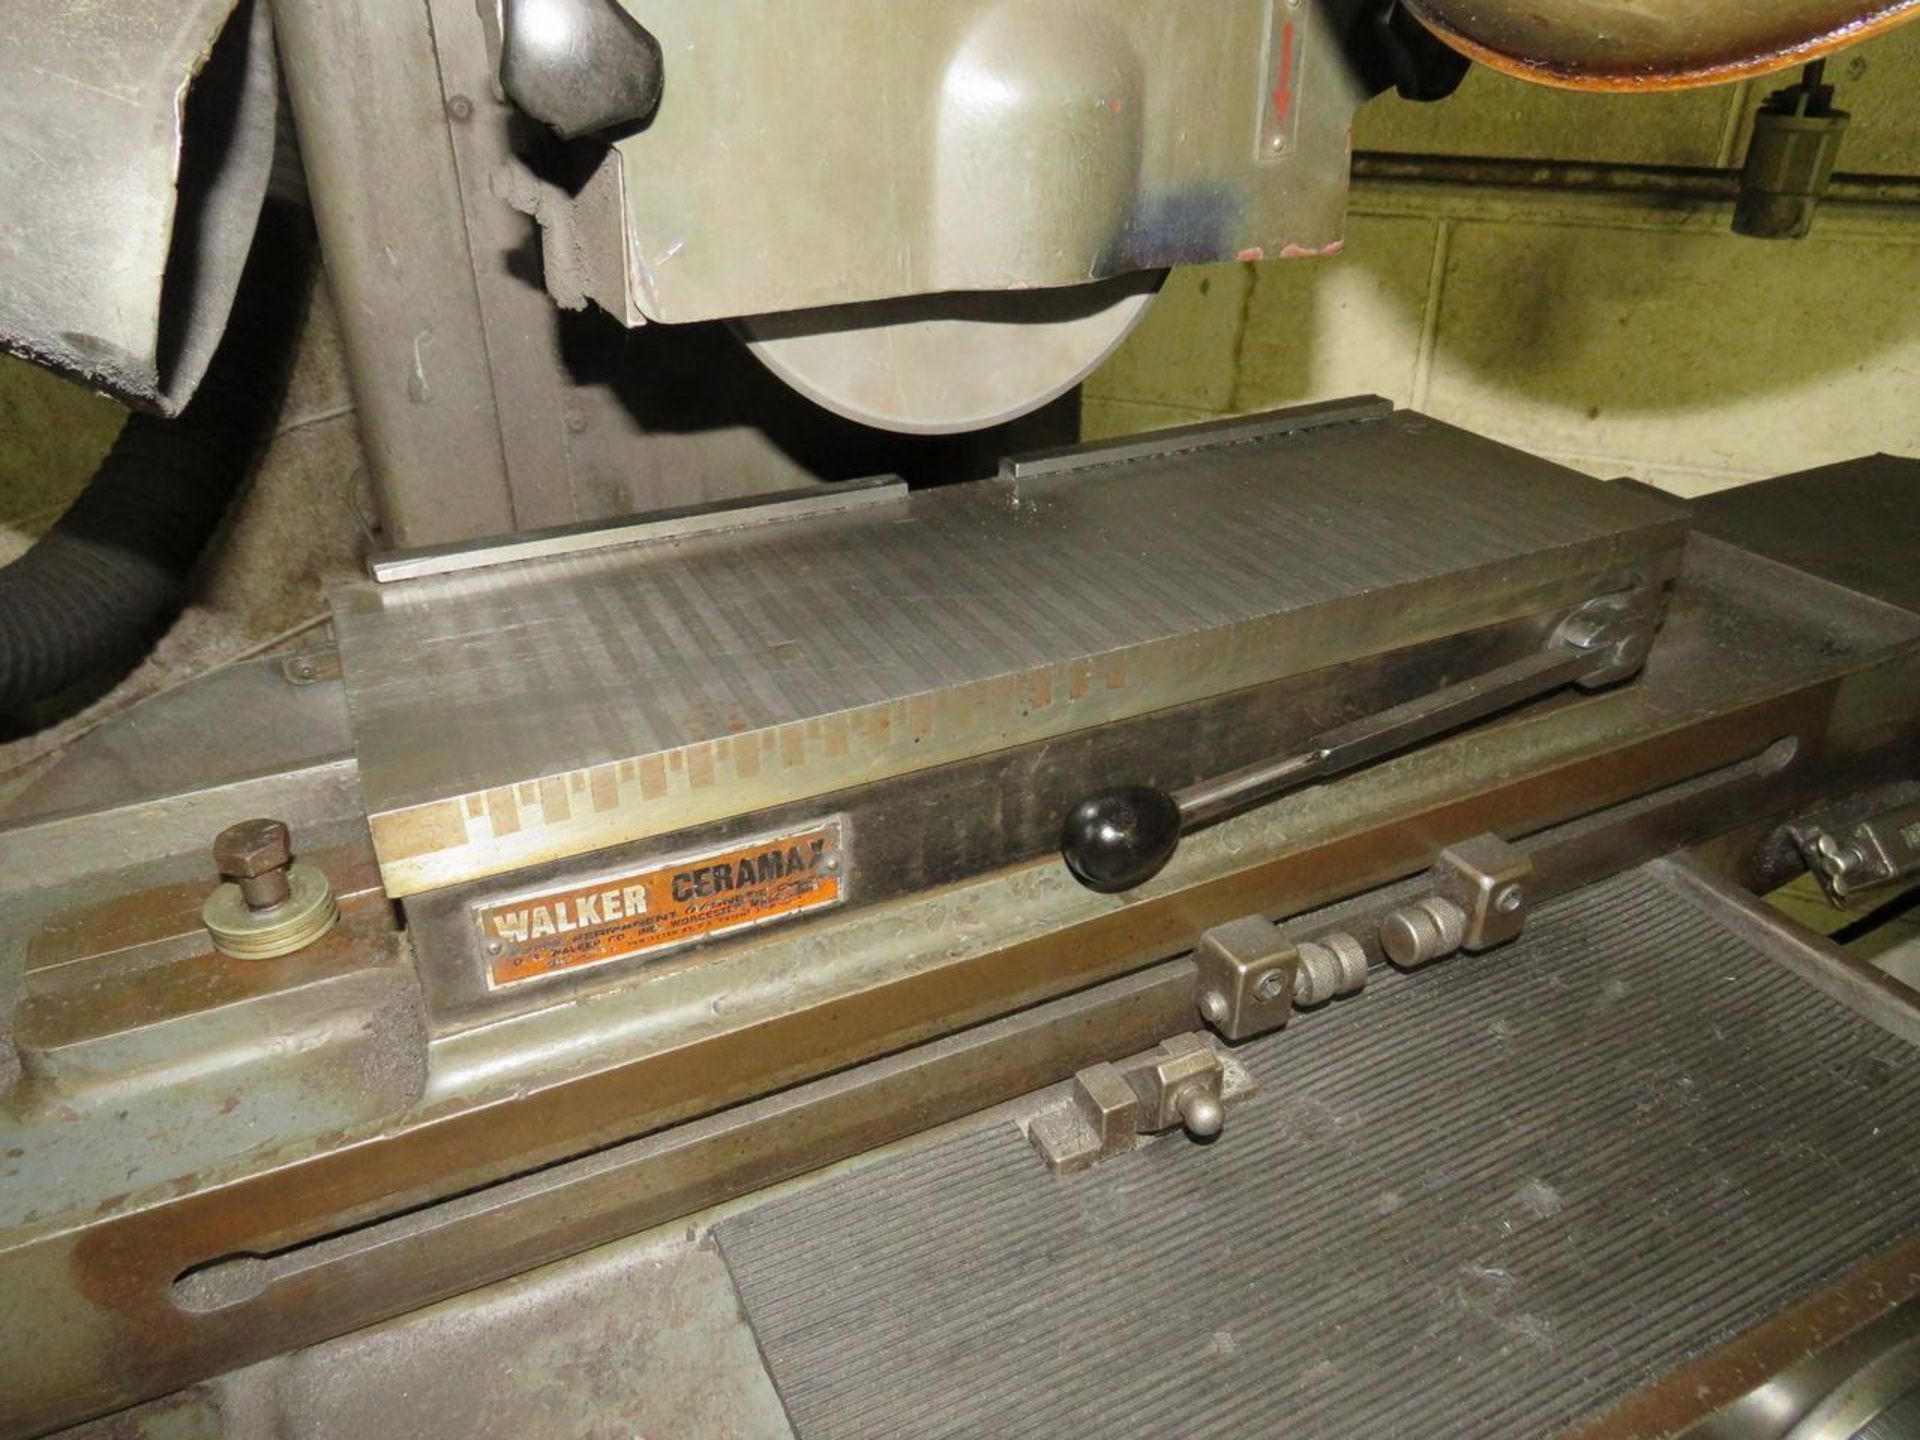 1957 PARKER MAJESTIC #2 6" x 18" HYDRAULIC SURFACE GRINDER - Image 4 of 6